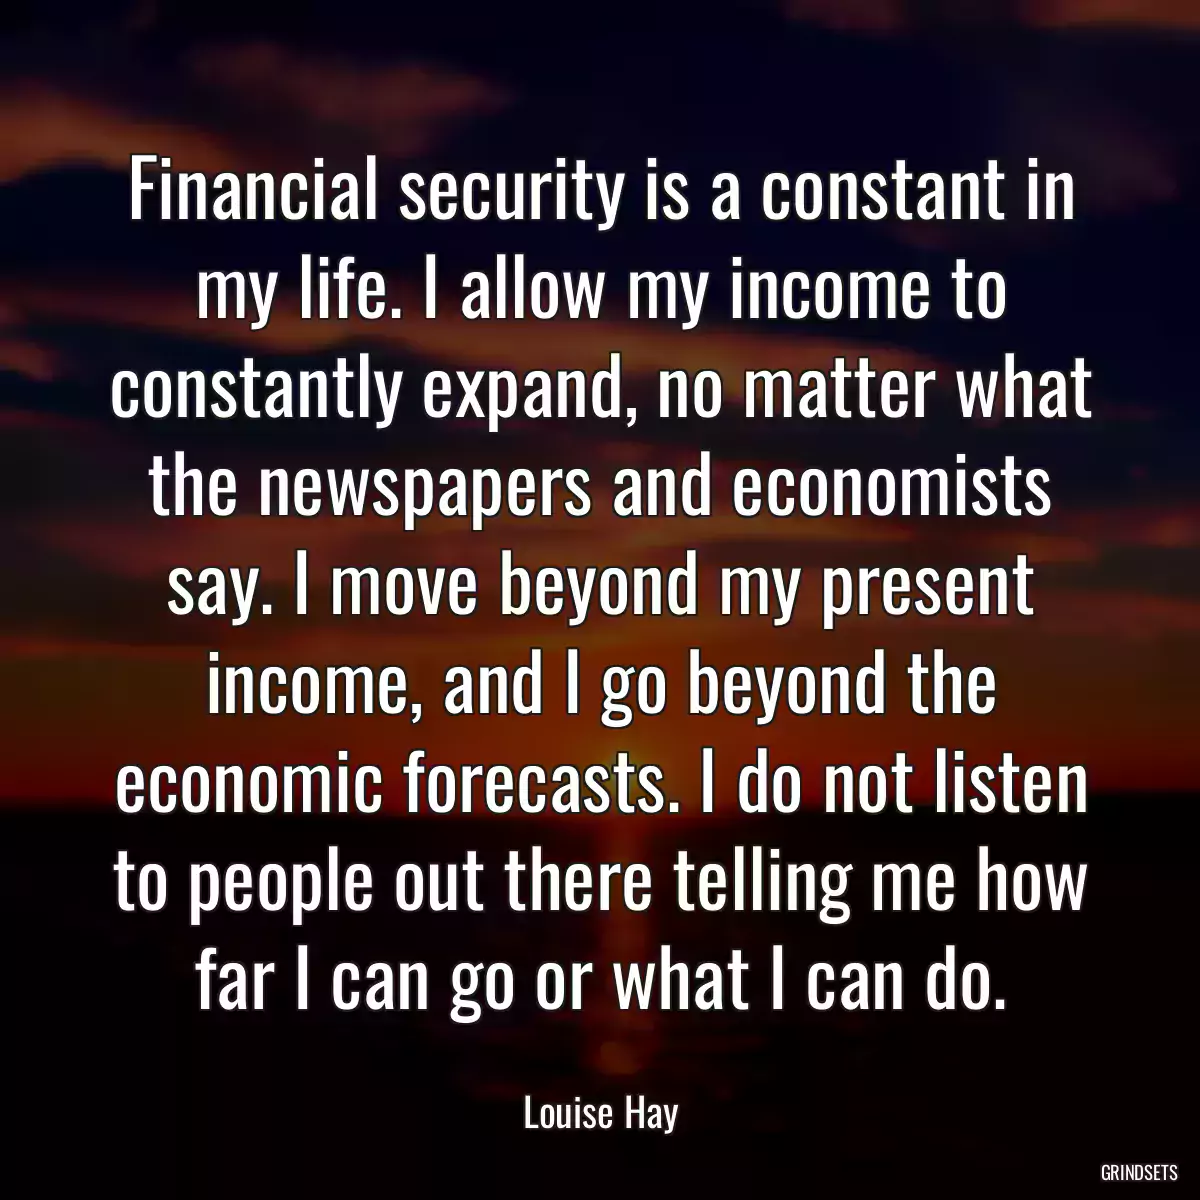 Financial security is a constant in my life. I allow my income to constantly expand, no matter what the newspapers and economists say. I move beyond my present income, and I go beyond the economic forecasts. I do not listen to people out there telling me how far I can go or what I can do.